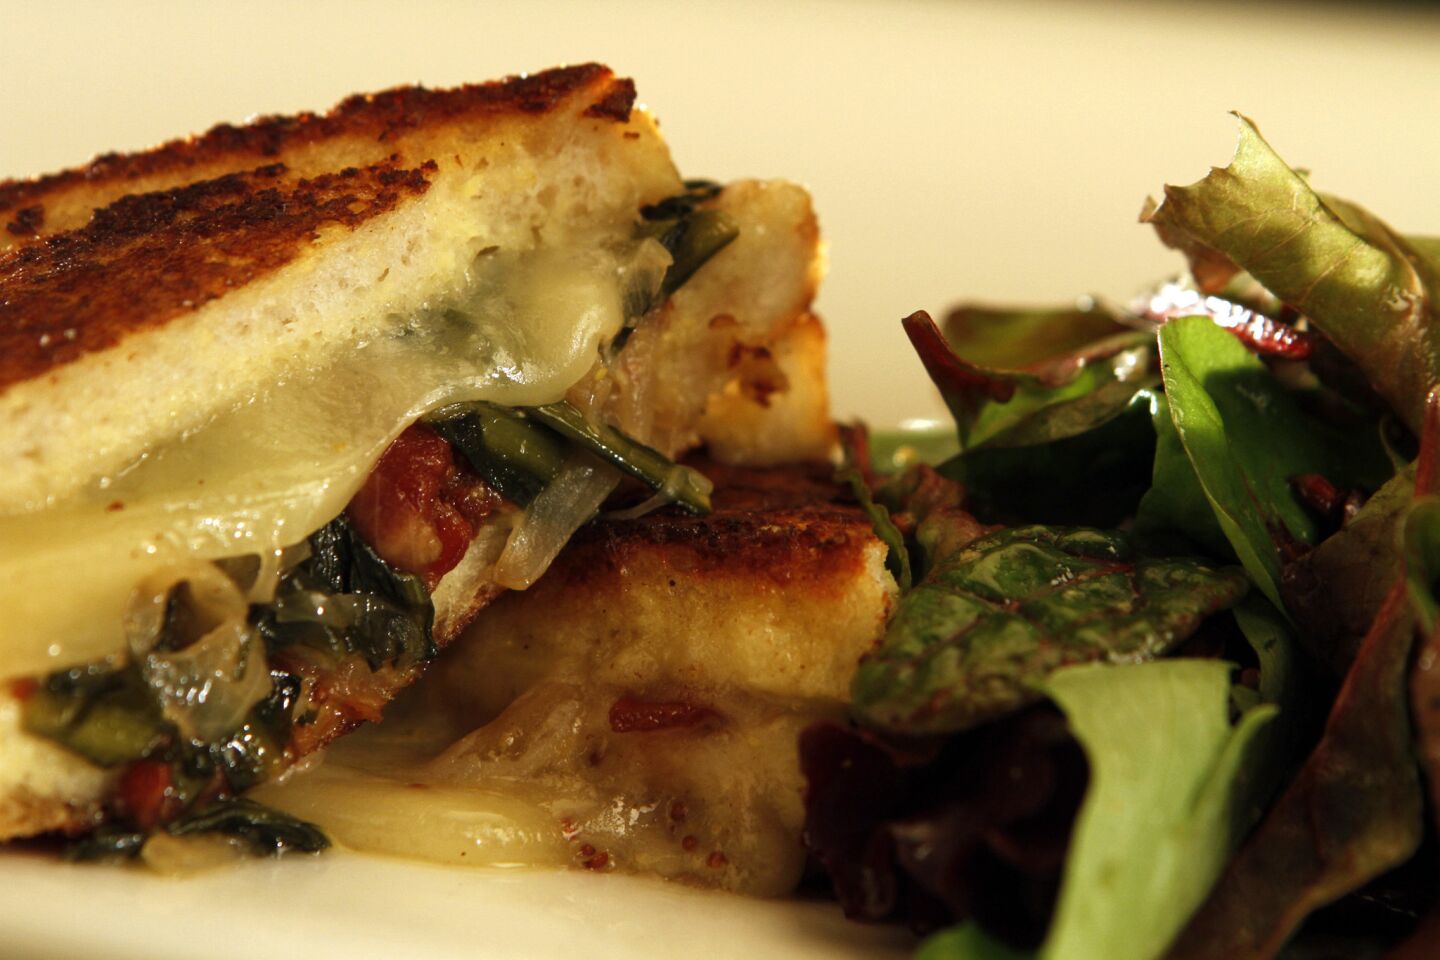 Savory stuffed French toast with bacon, dandelion greens and Gruyere cheese